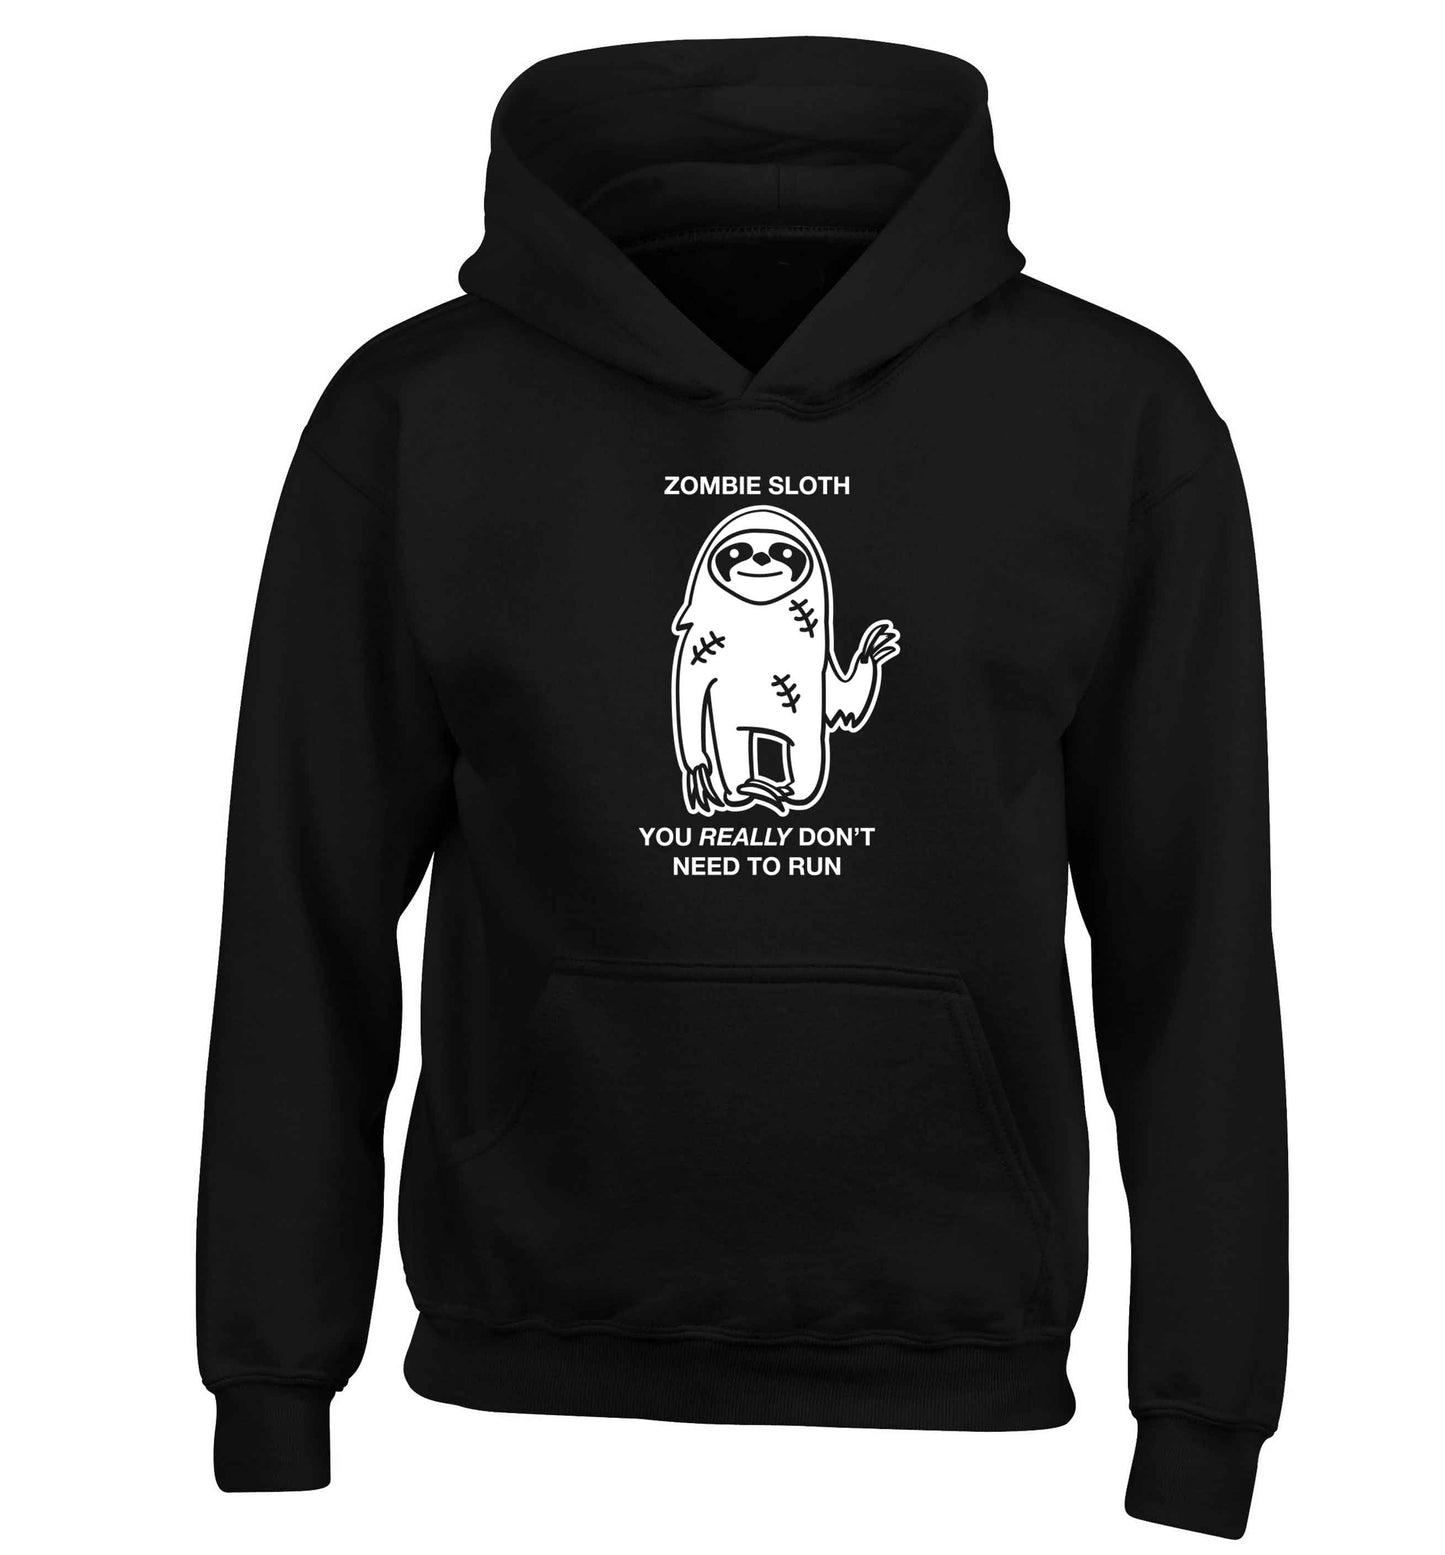 Zombie sloth you really don't need to run children's black hoodie 12-13 Years